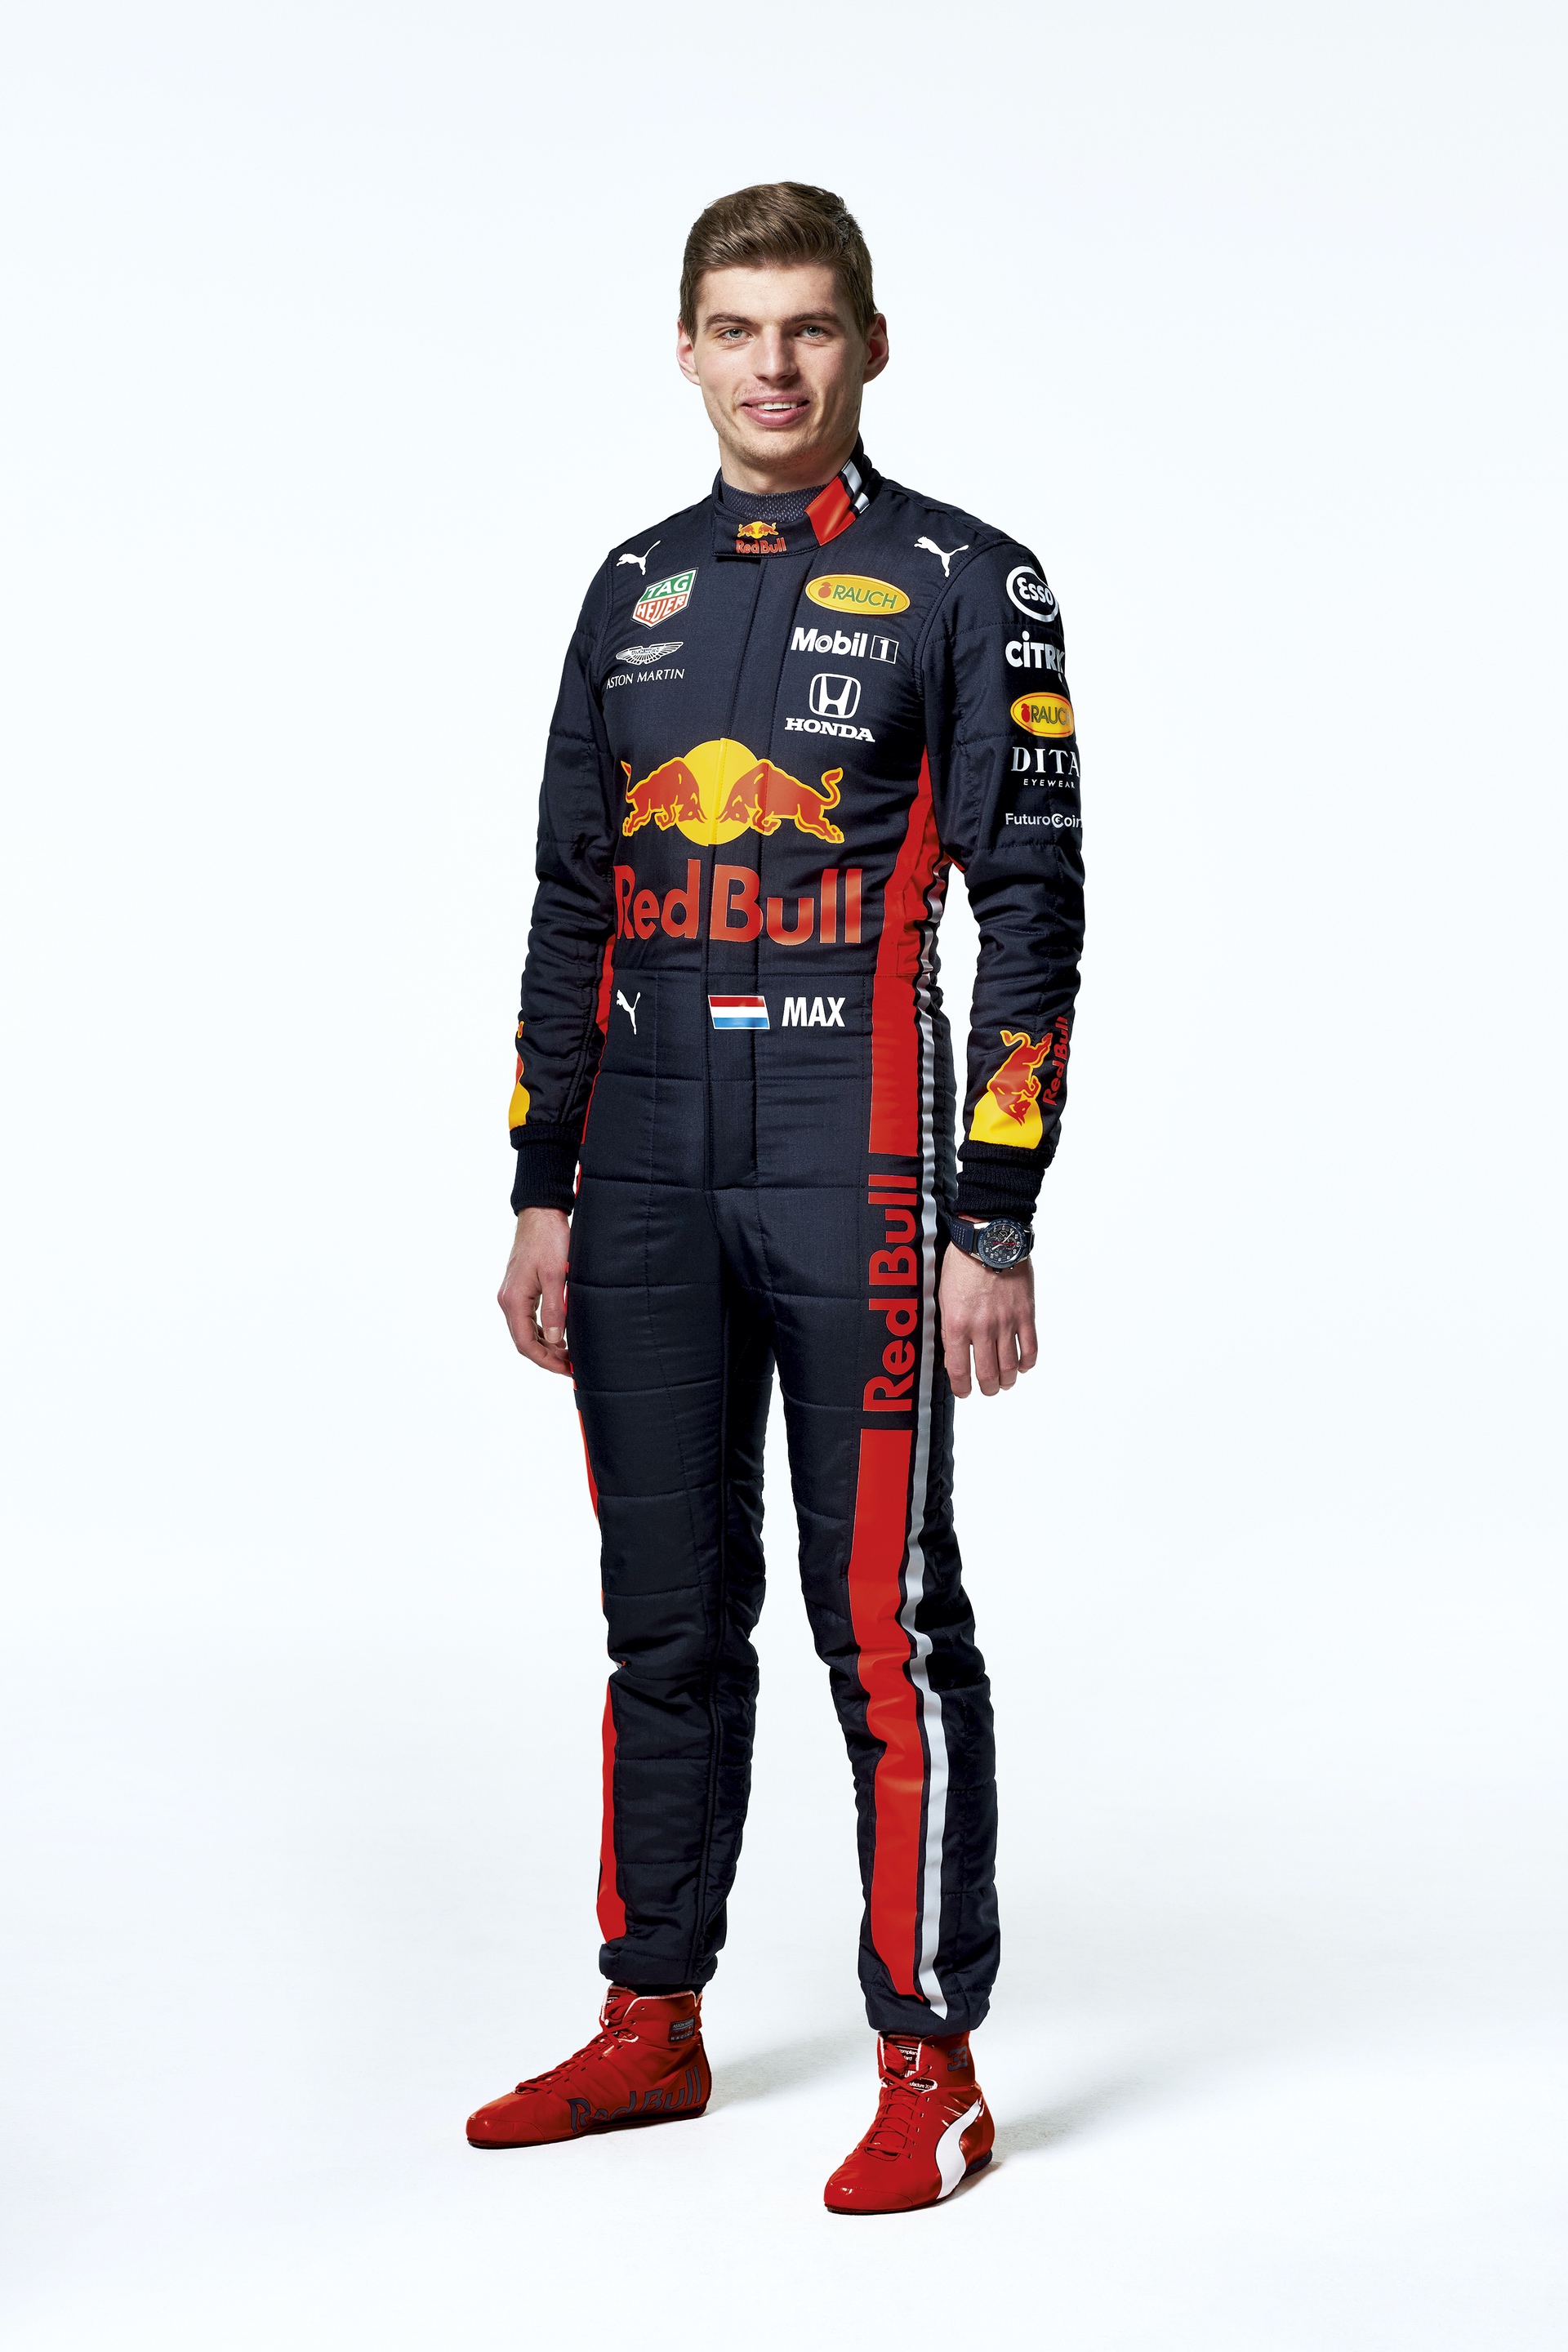 Max Verstappen seen during the Red Bull Racing 2019 Studio Shoot, February 2019, United Kingdom // Dustin Snipes/Red Bull Content Pool // AP-1YFPFH7Q51W11 // Usage for editorial use only // Please go to www.redbullcontentpool.com for further information. //